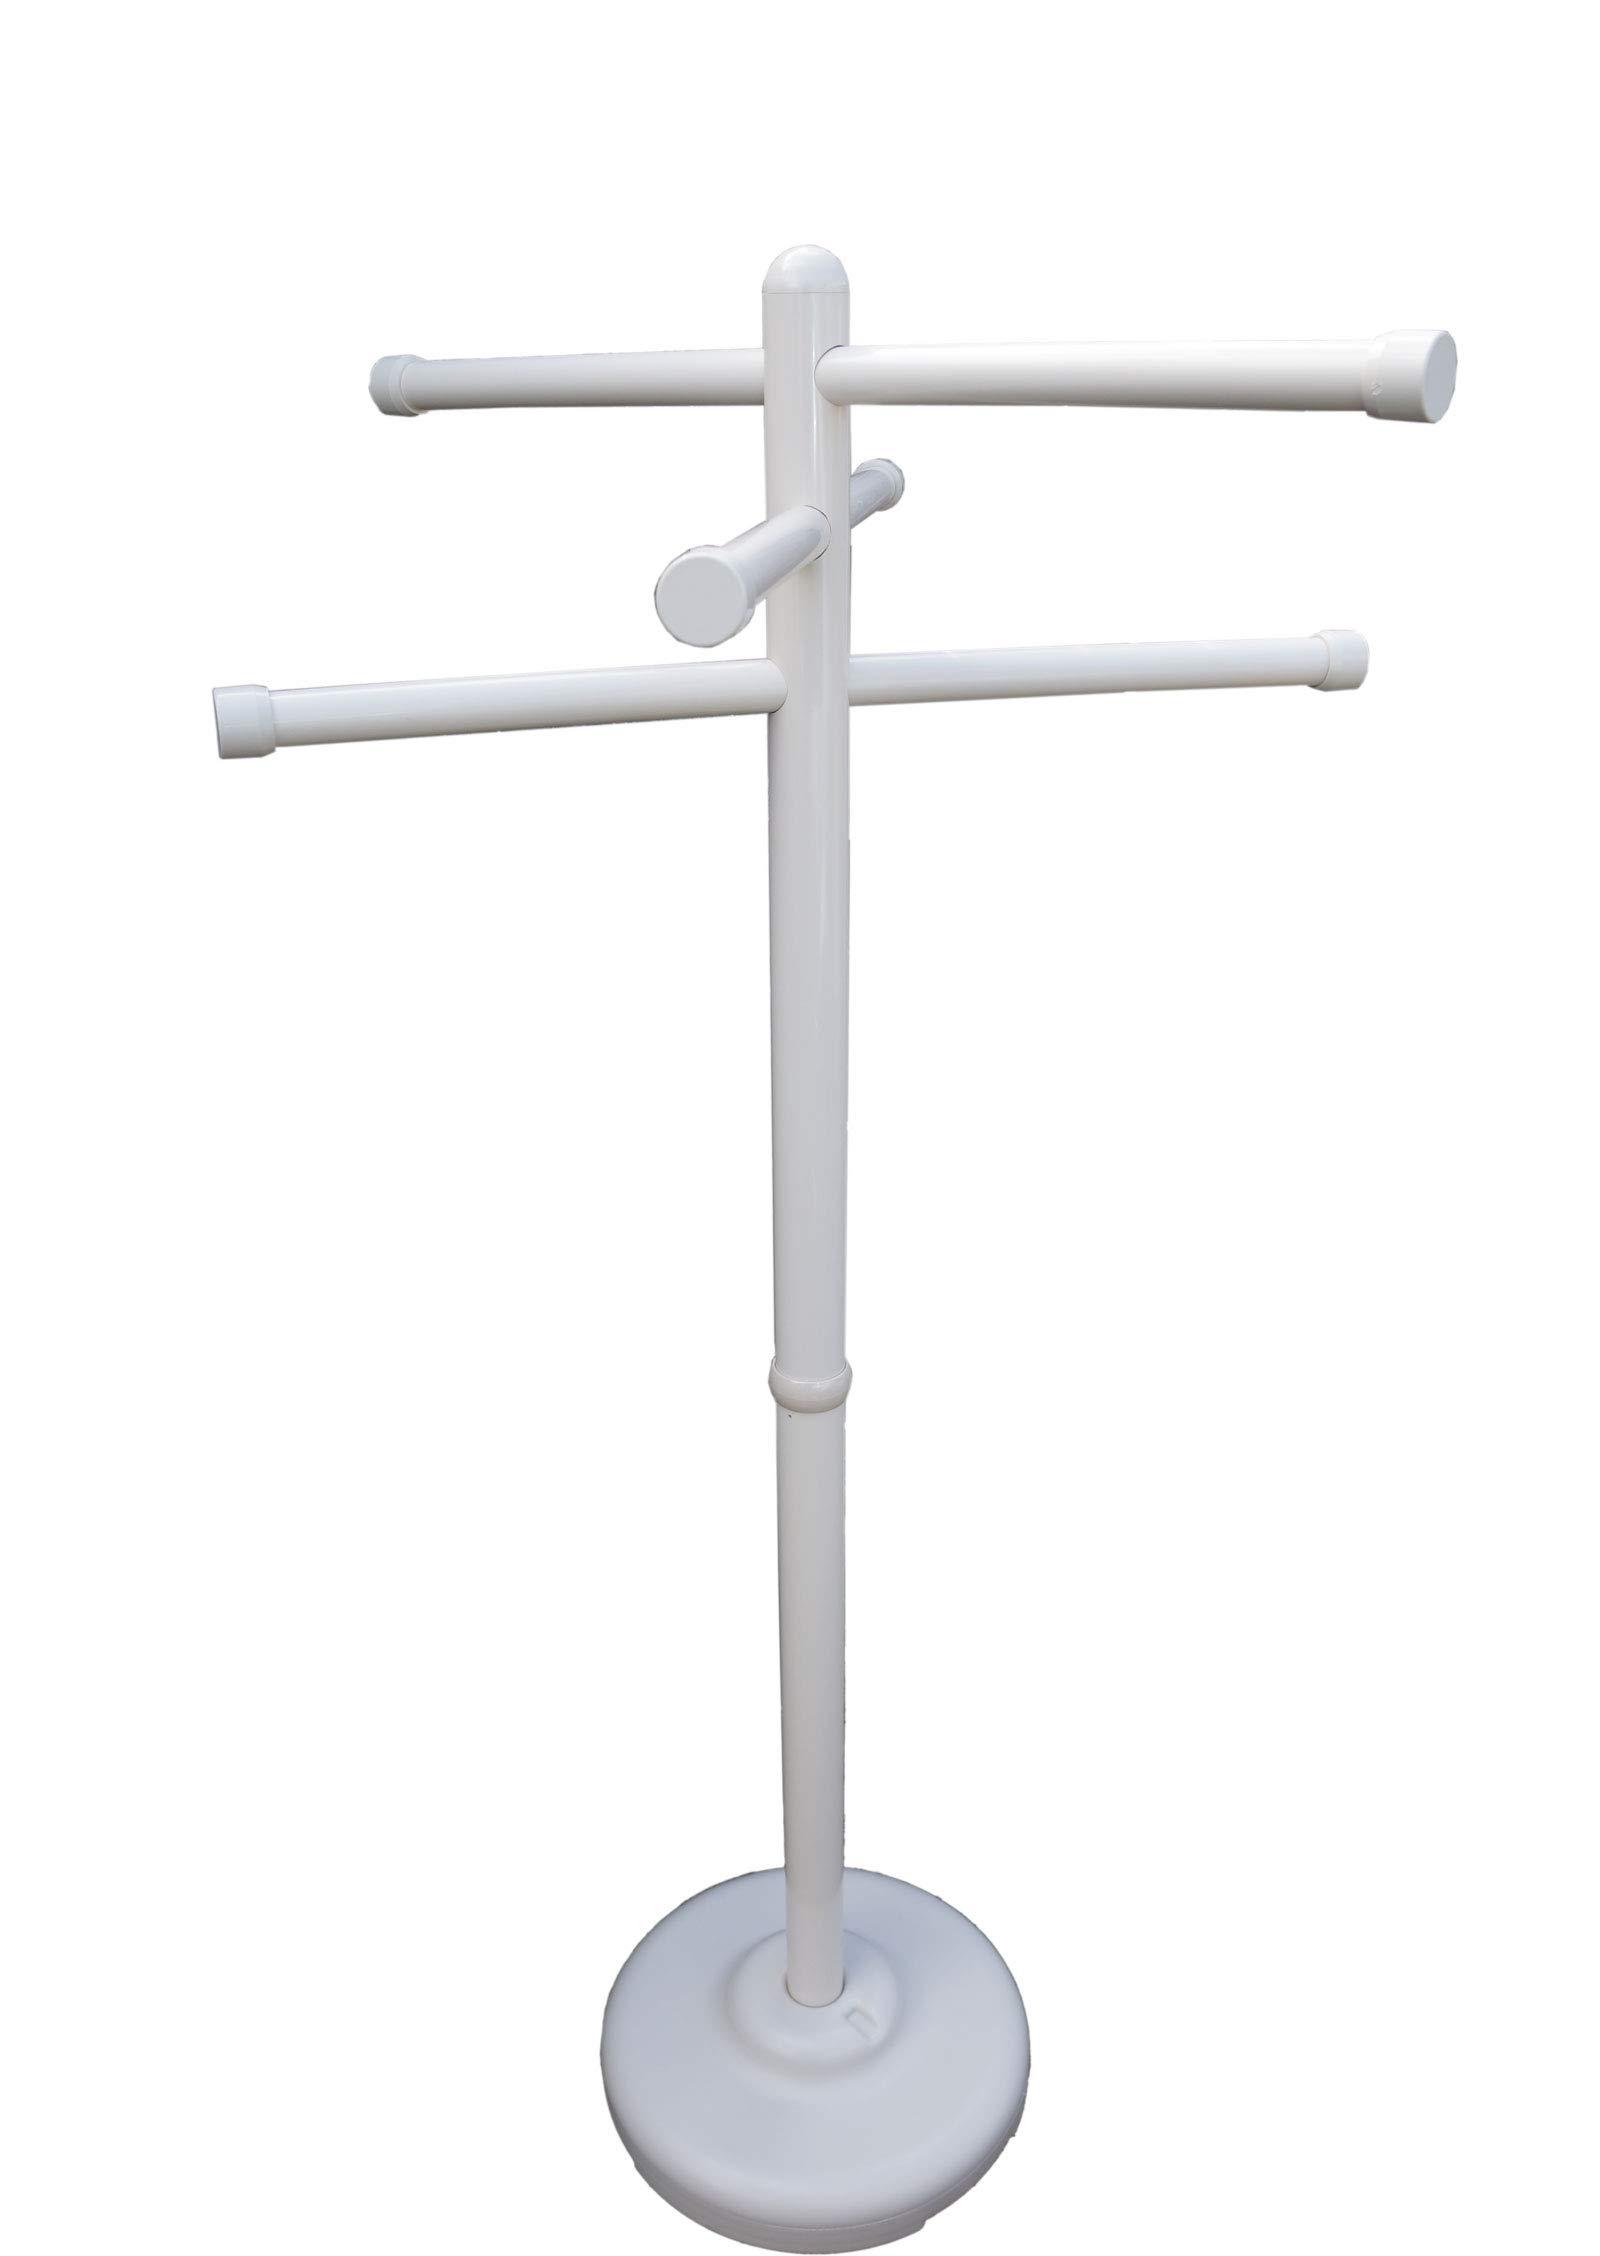 Outdoor Lamp company portable, outdoor spa and pool towel rack - bone. made in the usa 3 bar towel stand for indoor and outdoor use. 50 tall towel